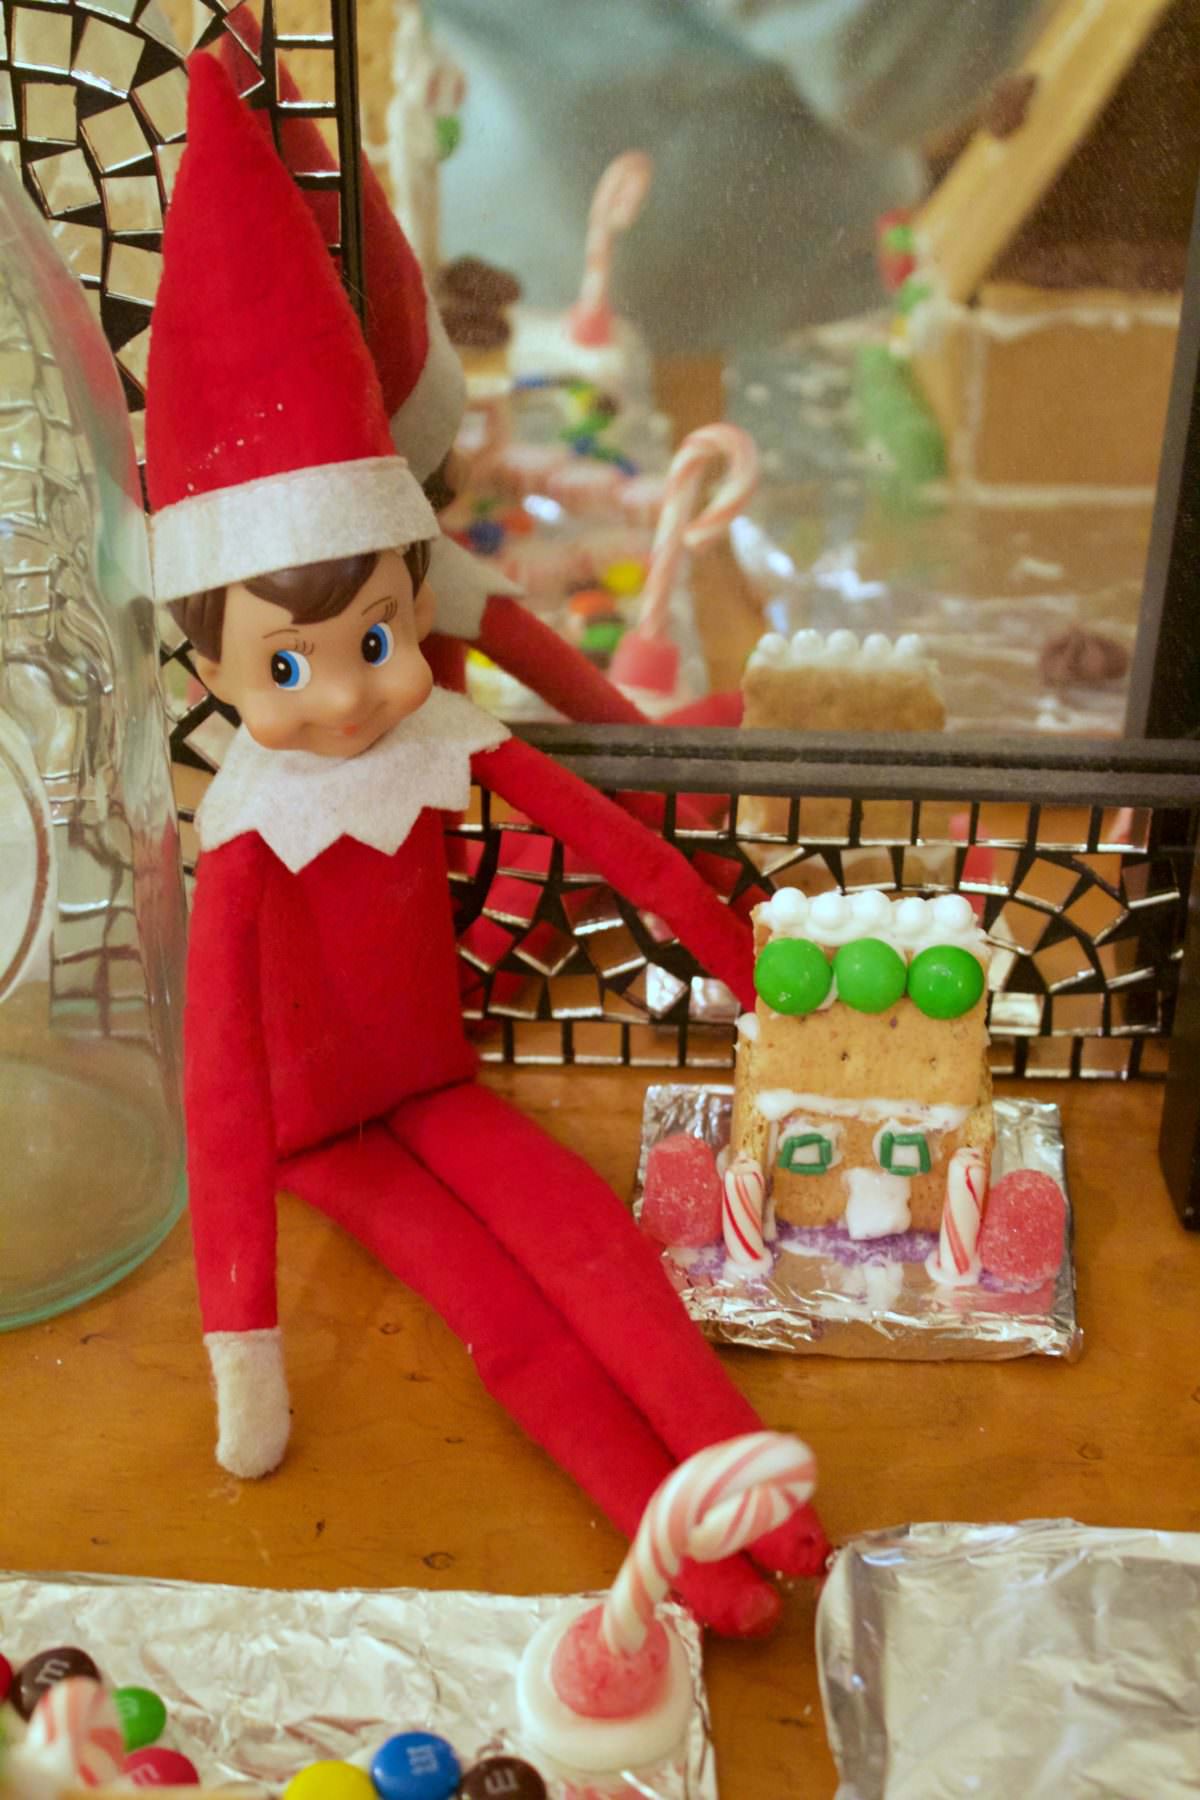 Elf on the shelf with a Gingerbread house